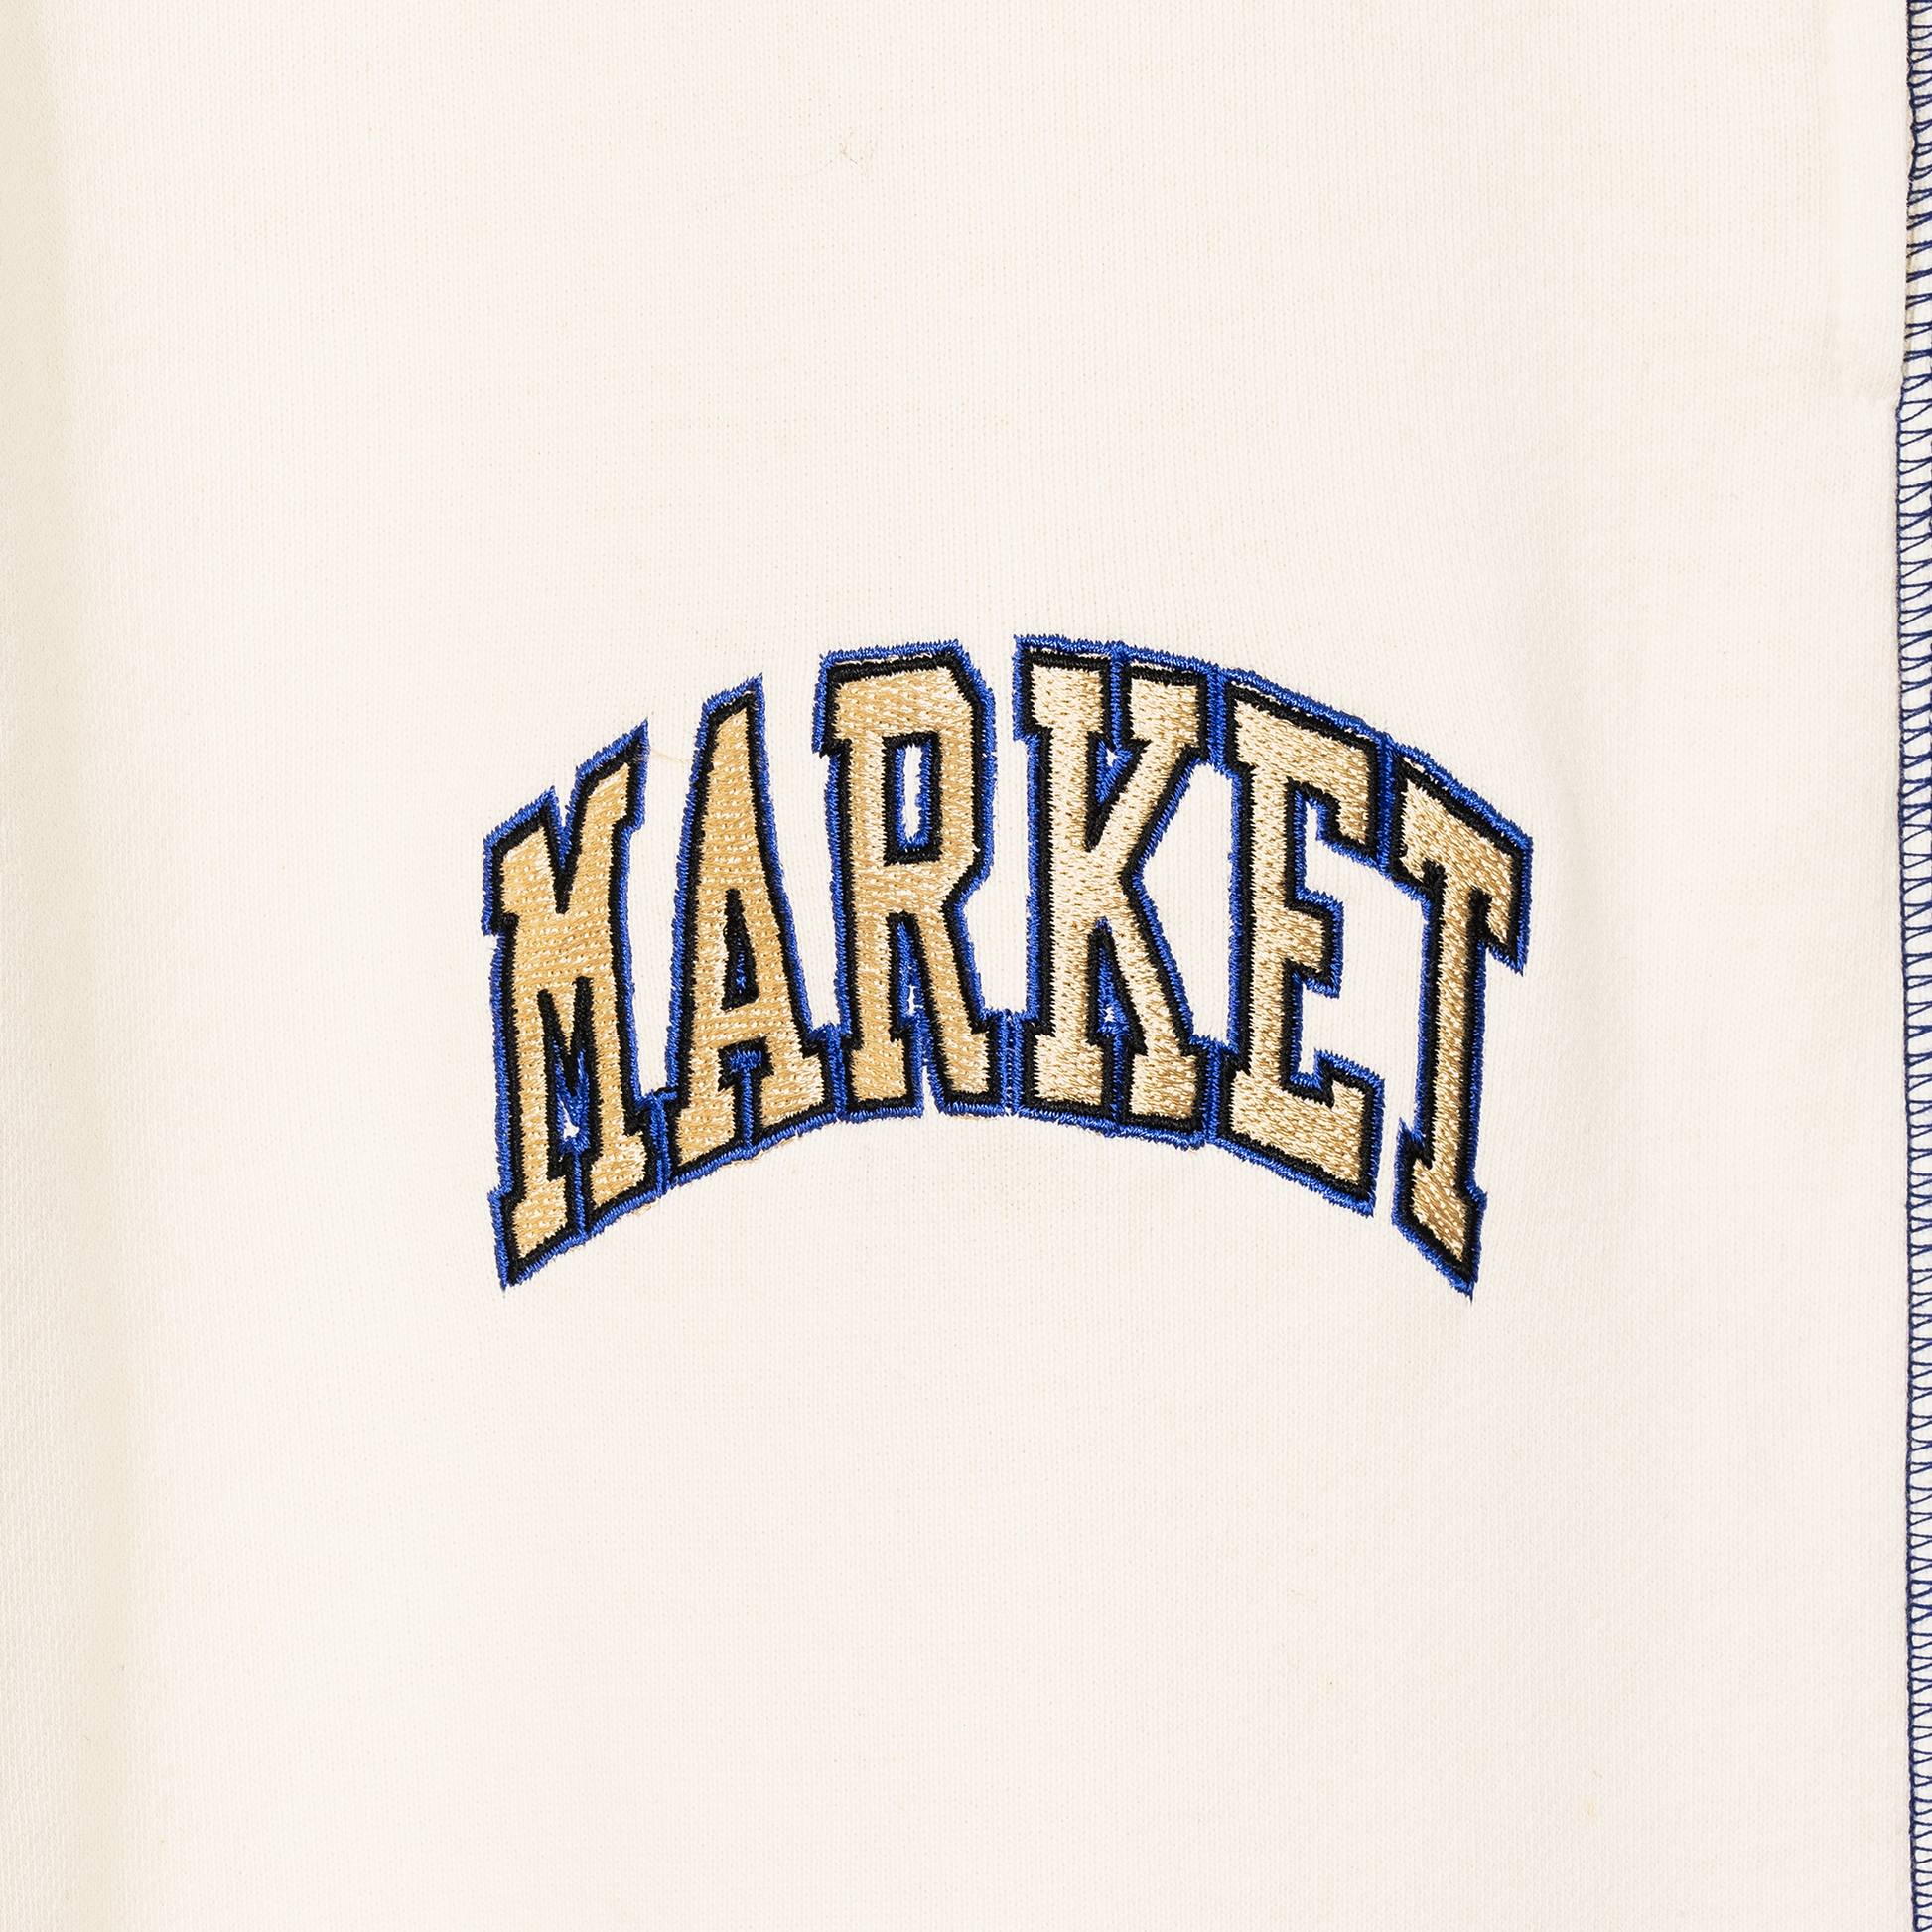 MARKET clothing brand TRIPLE STITCH SWEATPANTS. Find more graphic tees, sweatpants, shorts and more bottoms at MarketStudios.com. Formally Chinatown Market. 